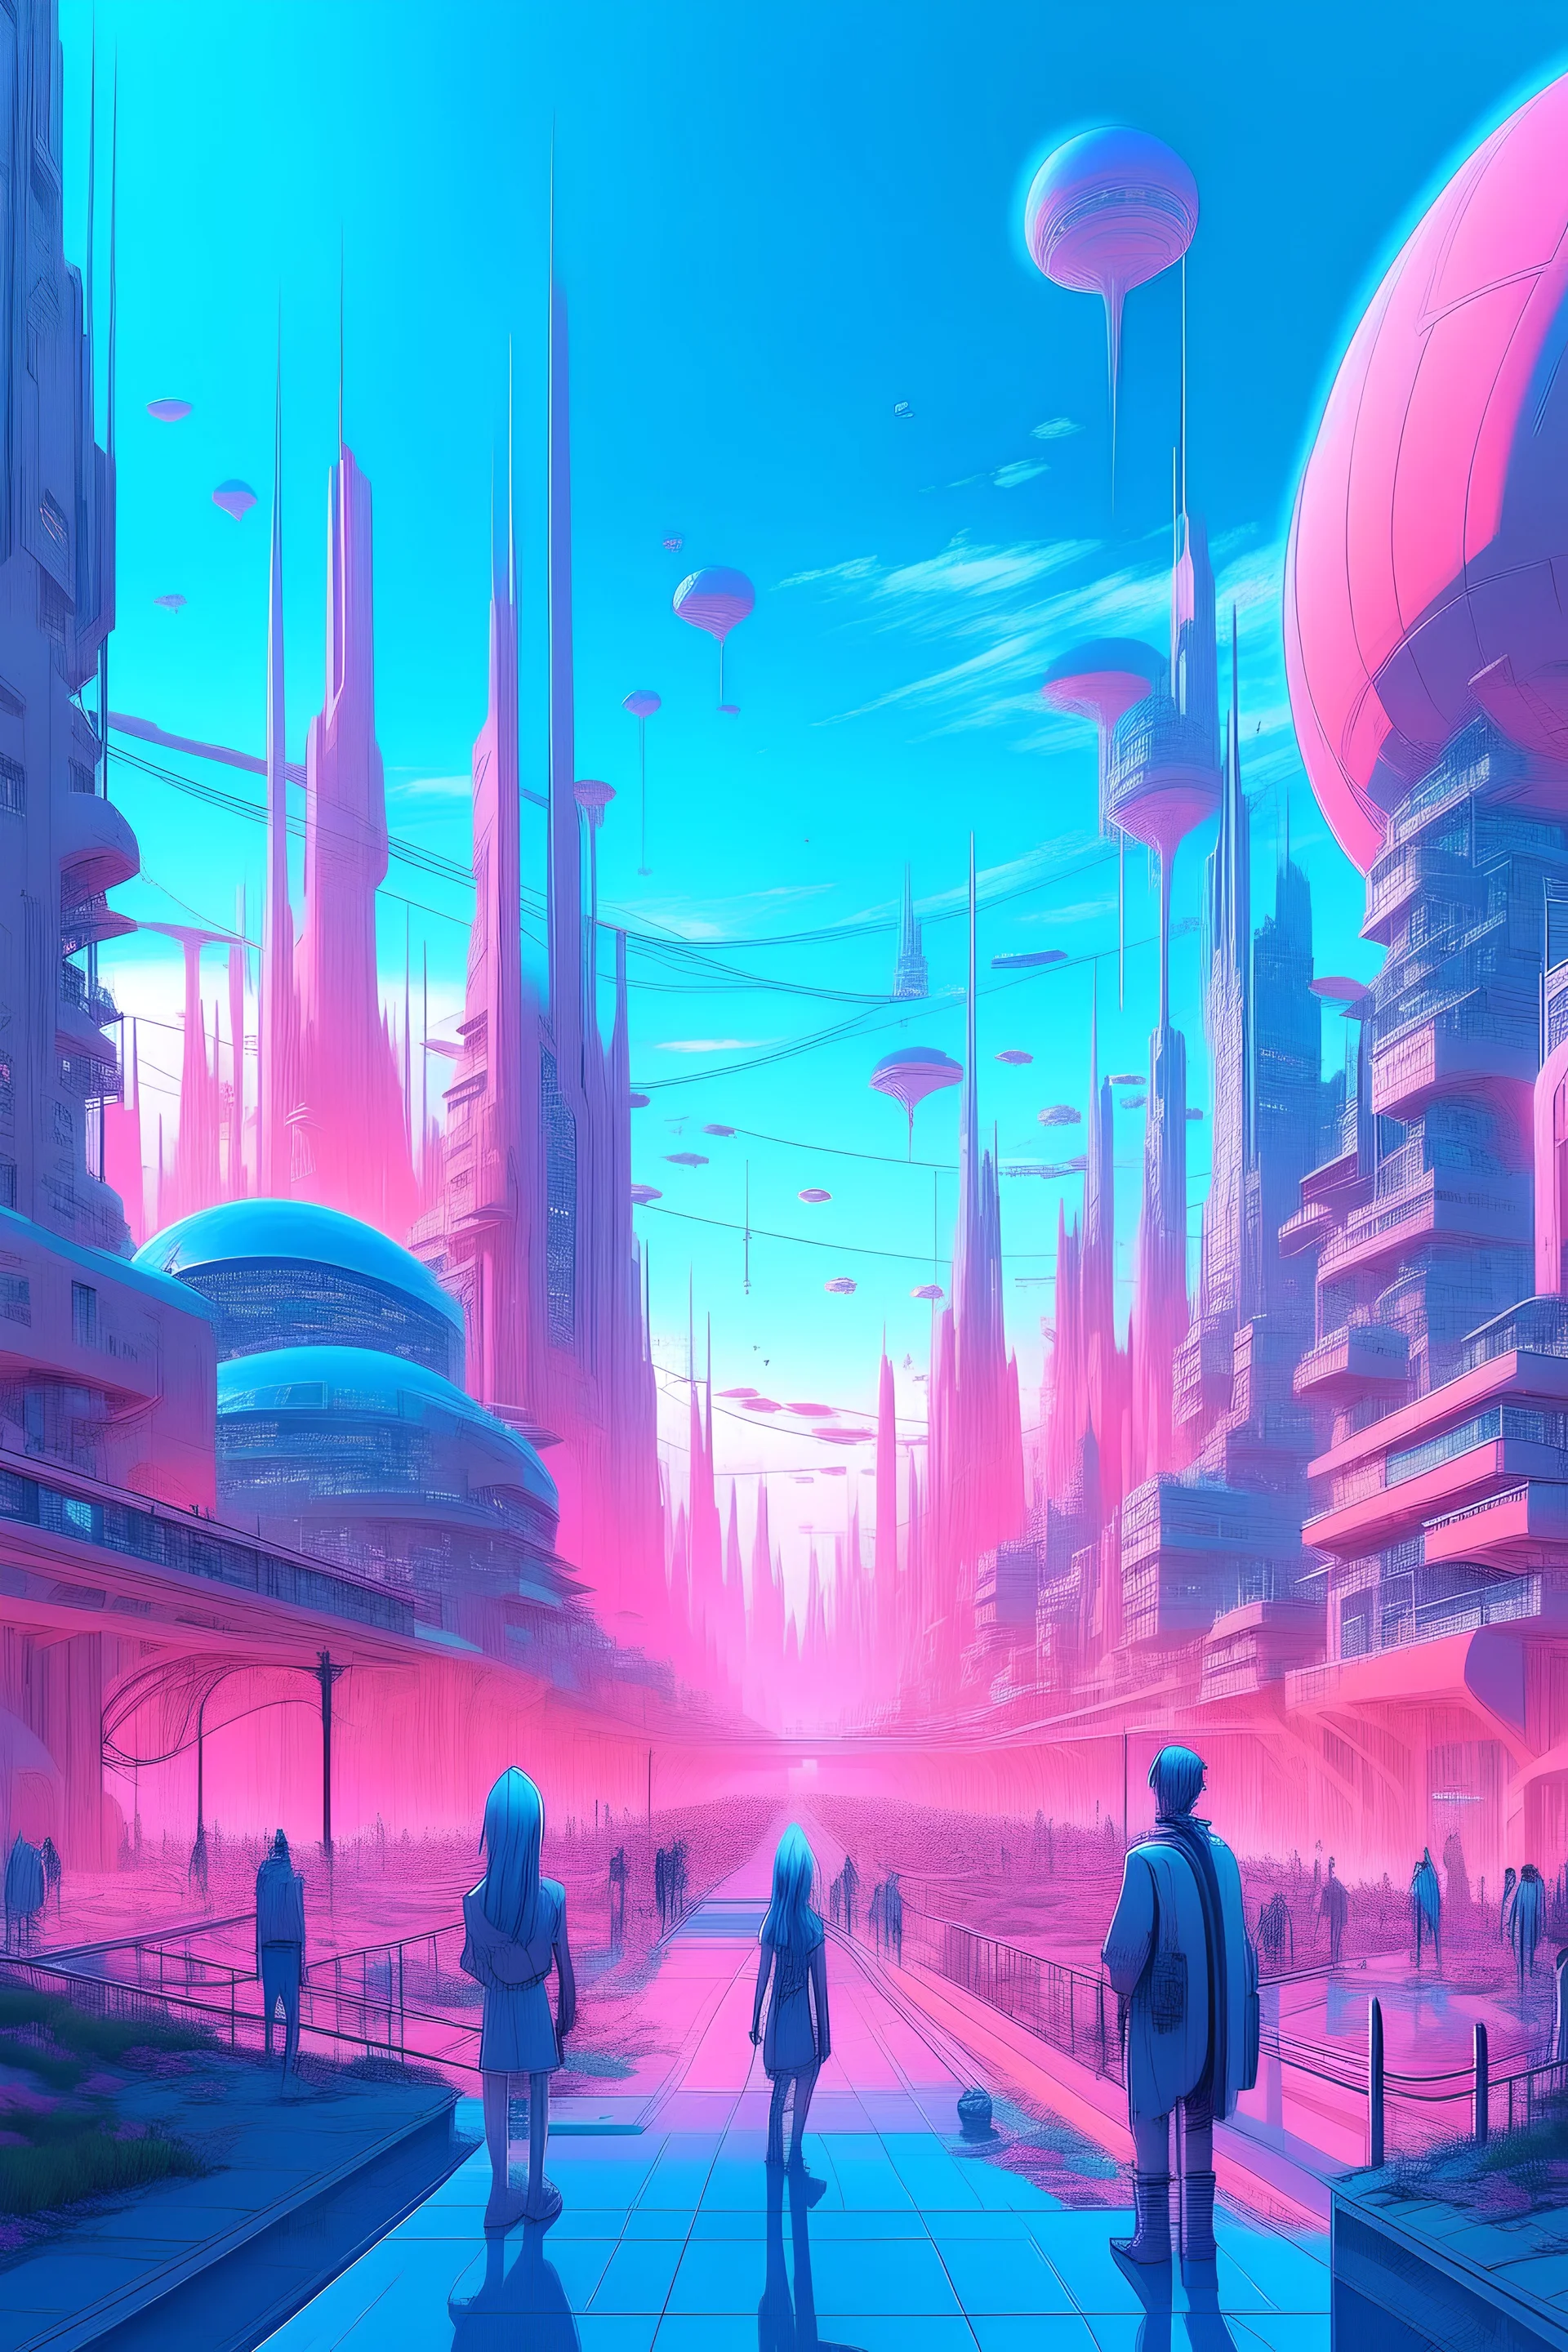 Dystopian world, without nature, moderne future city, light colors, pink, blue, beauty is important, with a lot of people in the background